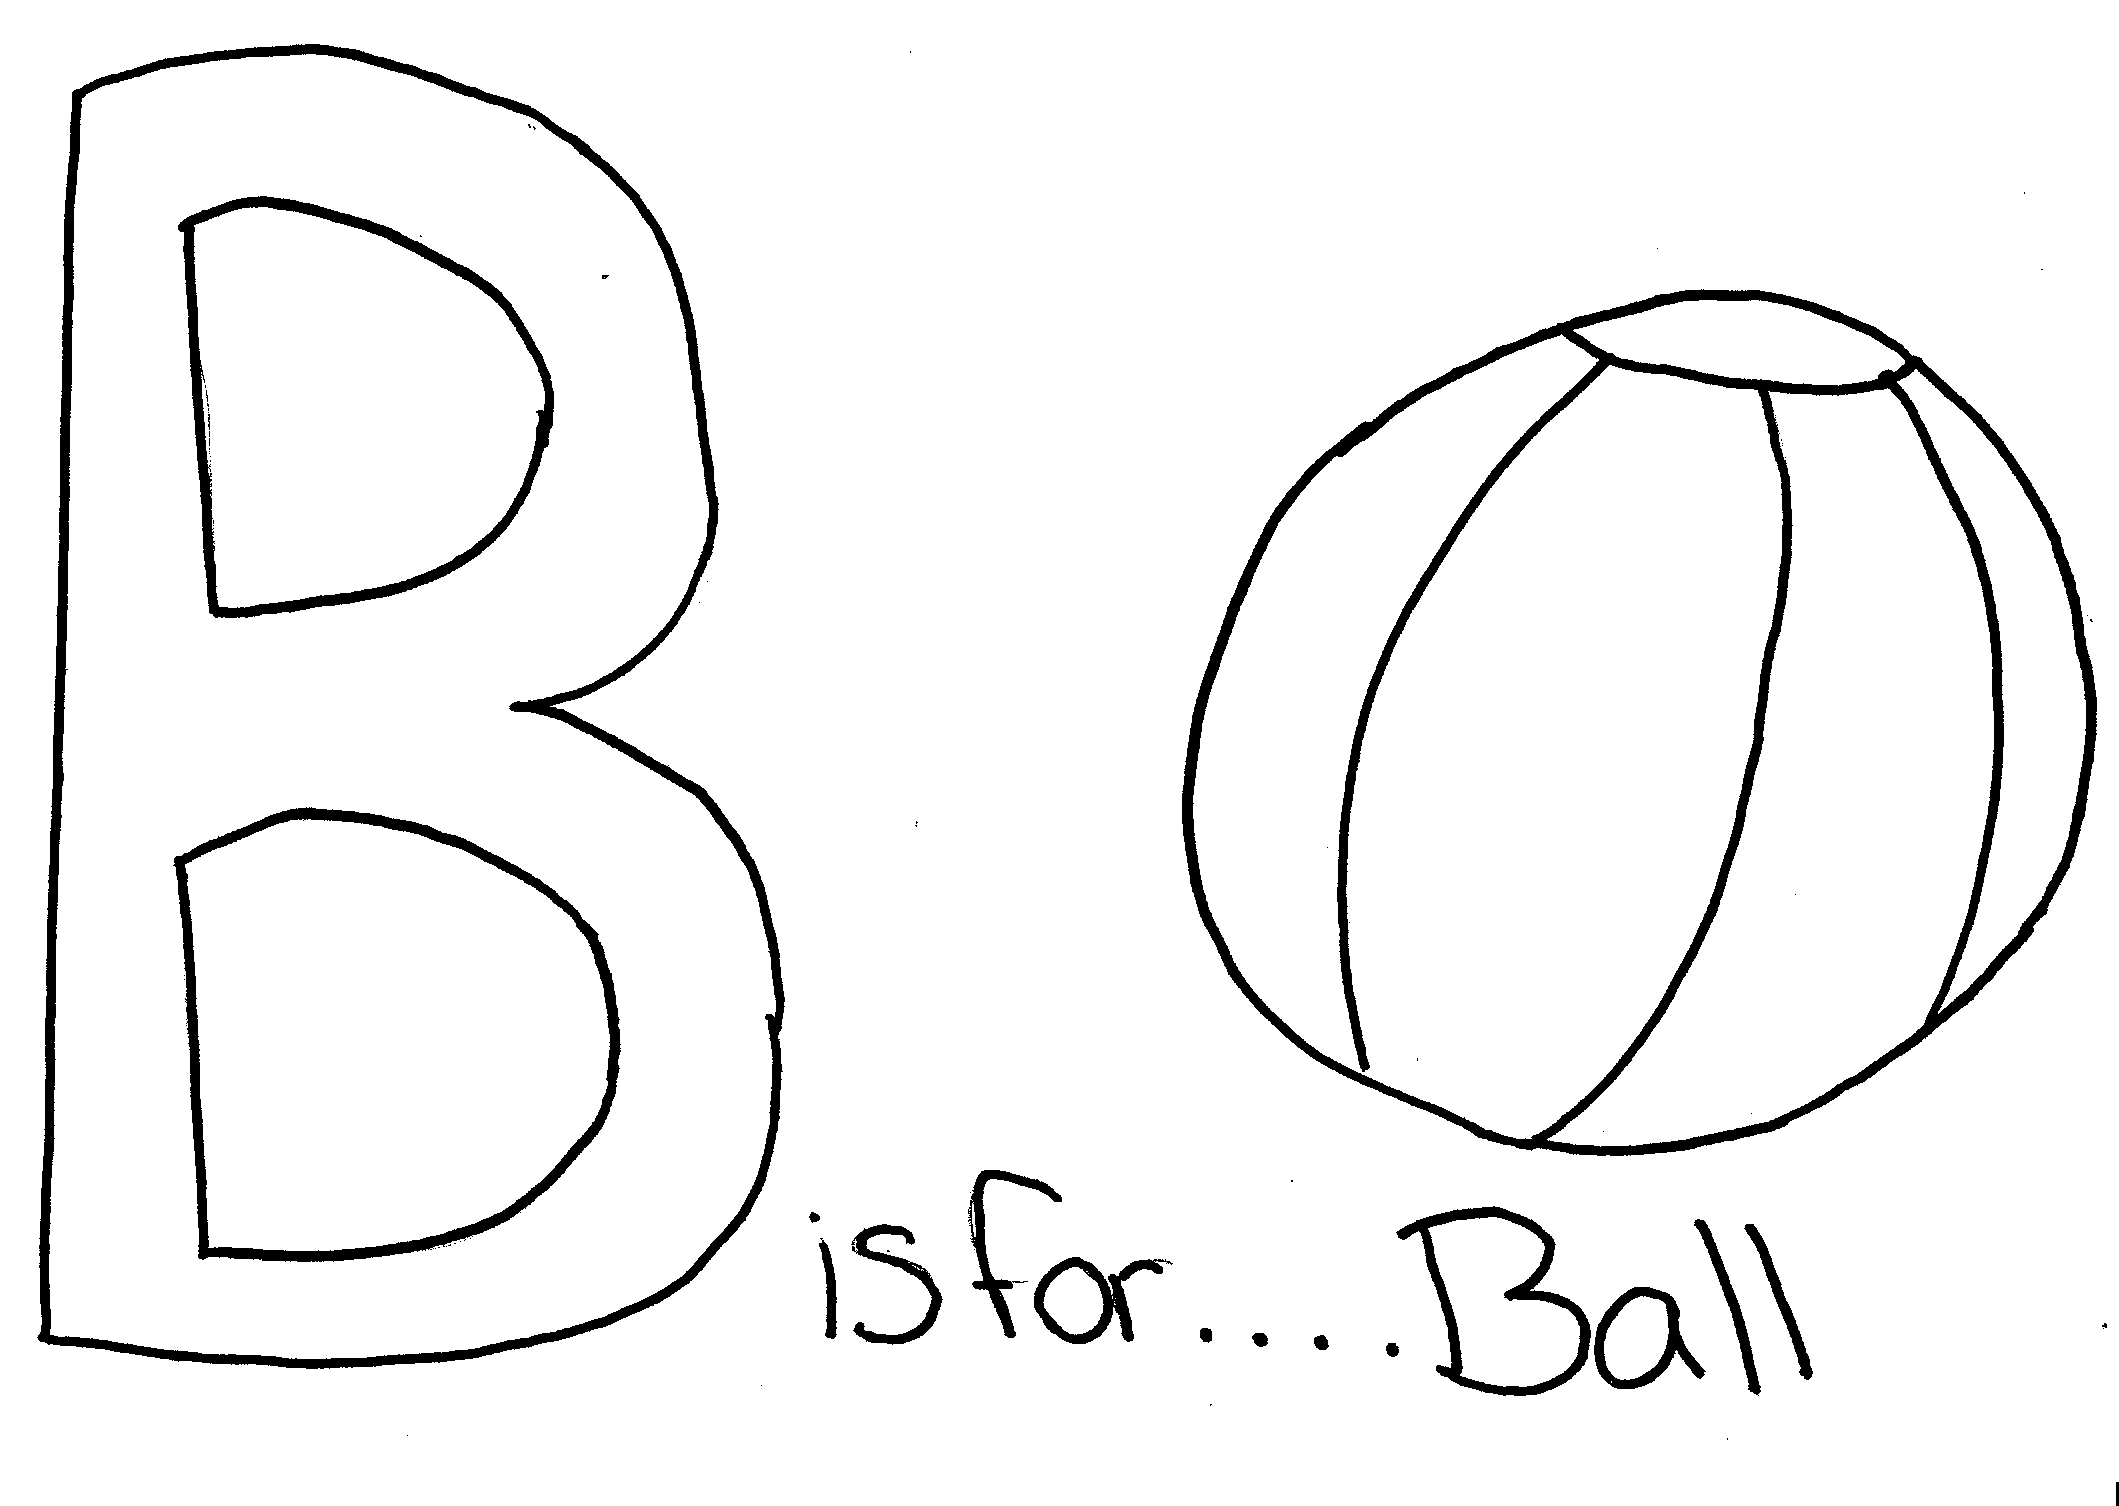 b for ball coloring page 100 ball coloring pages baseball player jumping to b page ball for coloring b 